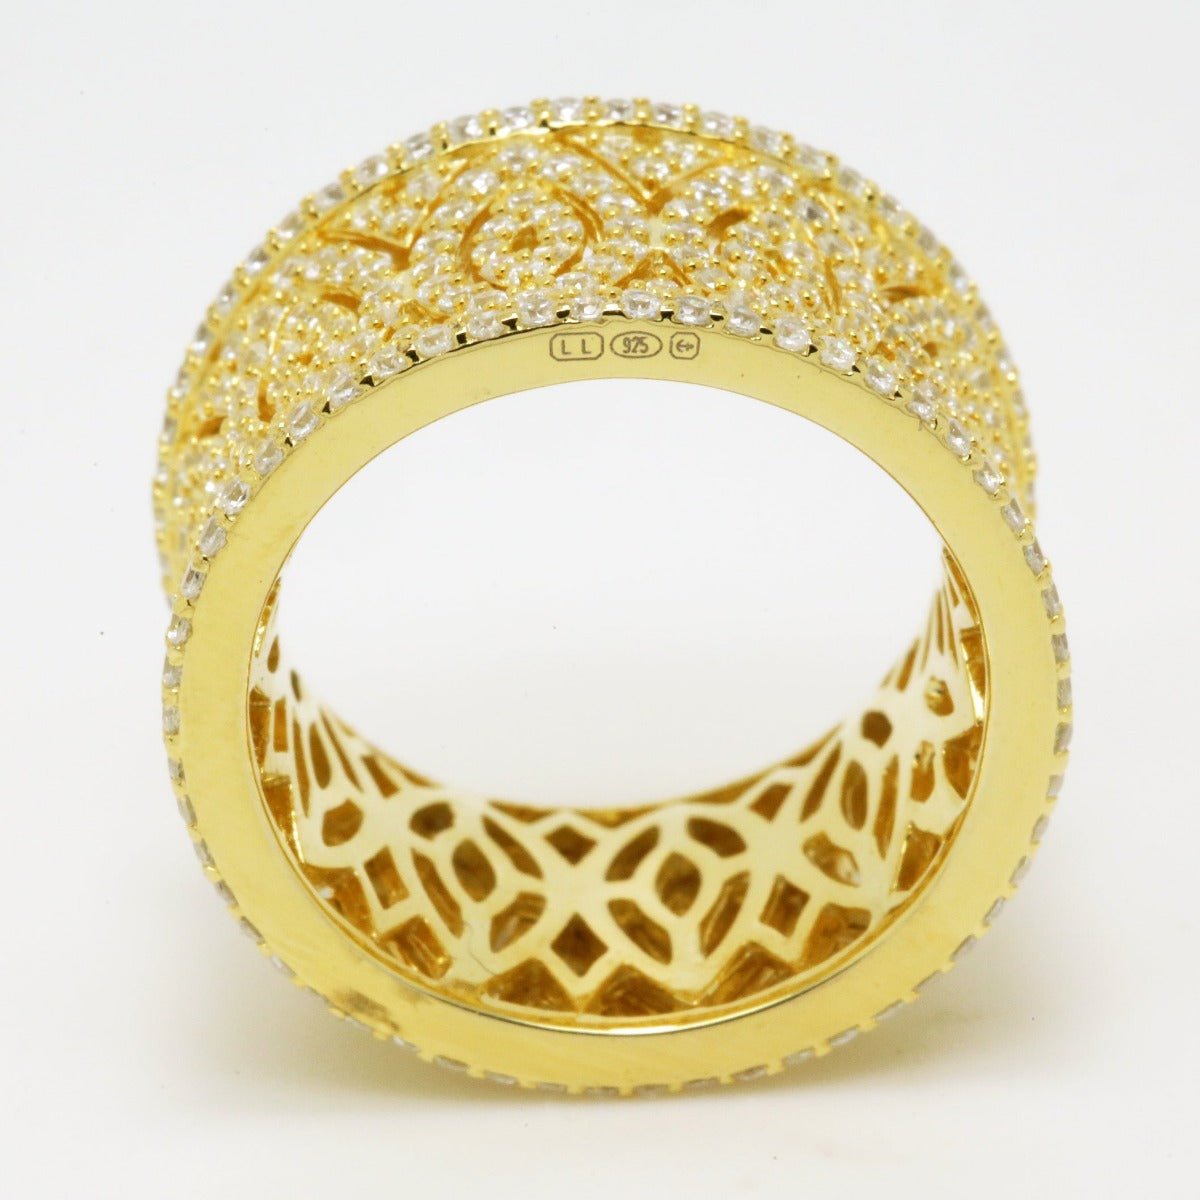 4.60ct Cubic Zirconia Filigree Full Eternity Ring in 14k Yellow Gold Plated Silver